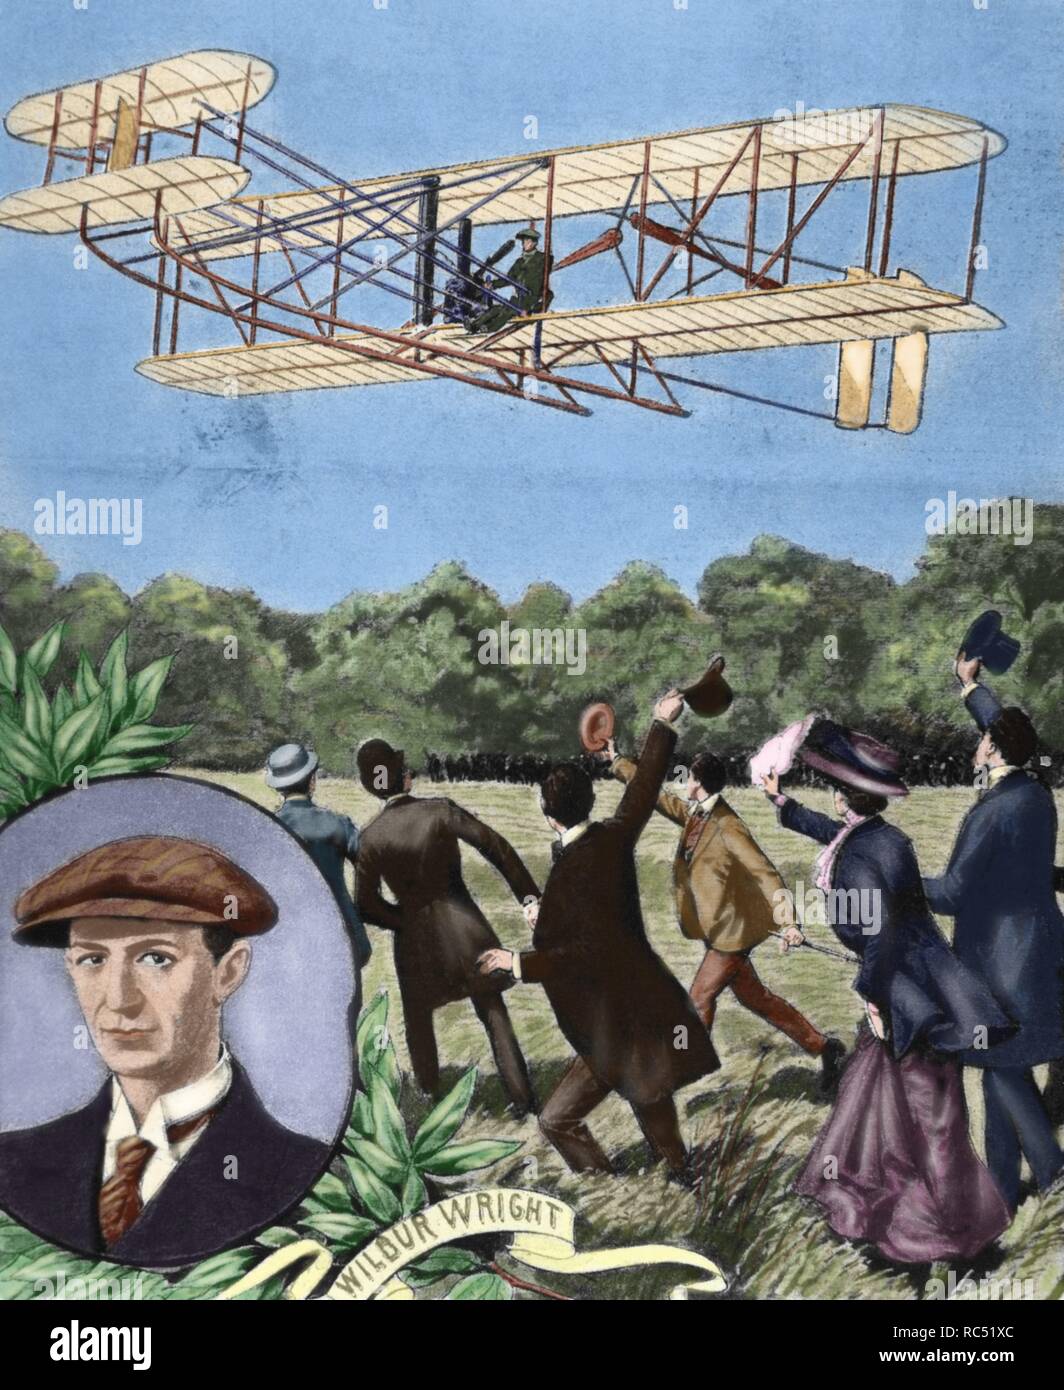 Wilbur Wright (1867-1912). American aviator. With his brother is credited with inventing and building the world's first successful airplane. Plane flying over the field Anvours (France) at a speed of 80 km / h. 1908. Colored engraving. Stock Photo